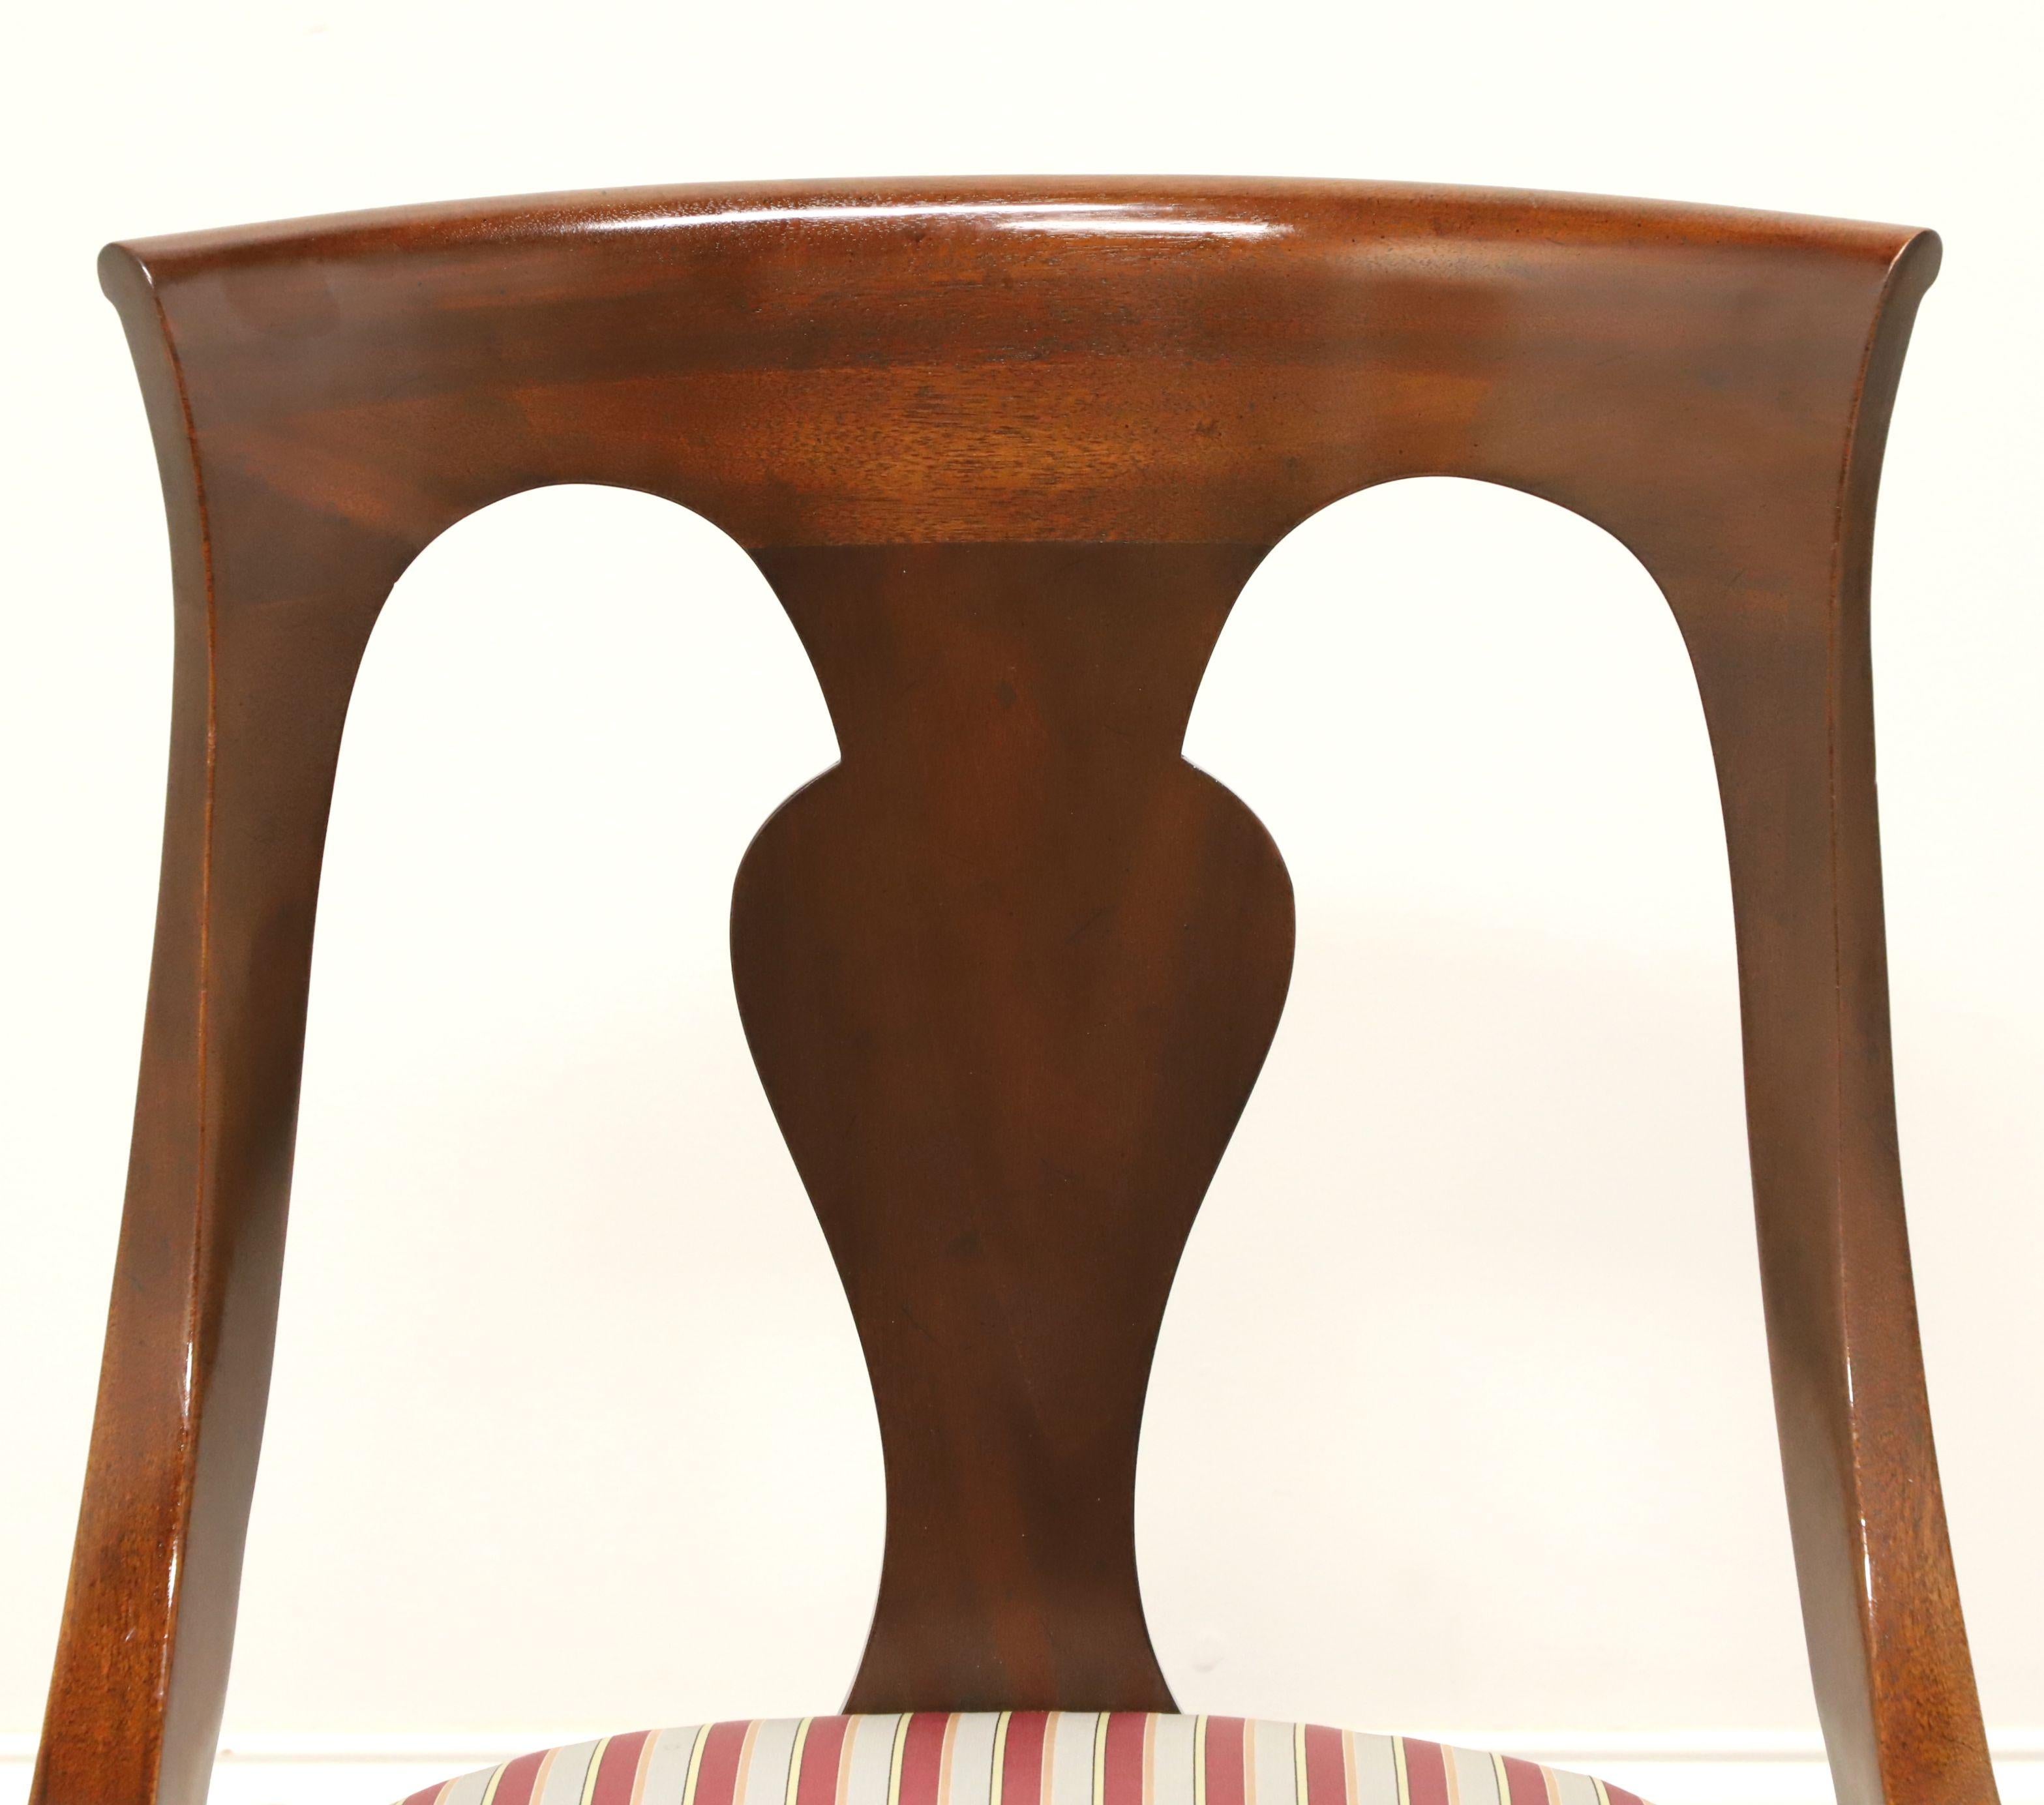 20th Century DREXEL HERITAGE Mahogany Empire Style Dining Side Chairs - Pair A